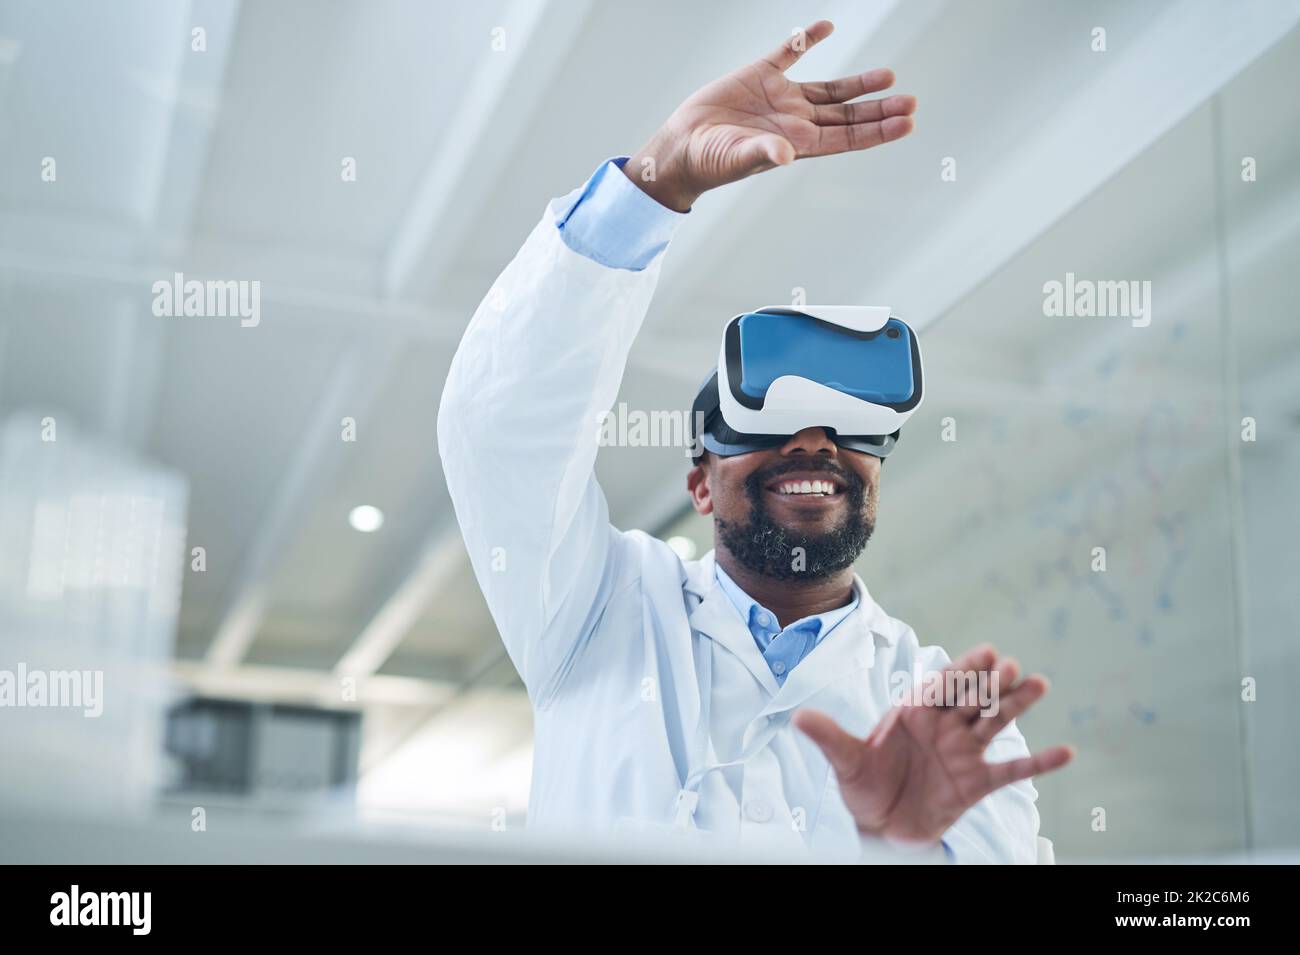 Shaping a whole new world through science. Shot of a mature scientist using a virtual reality headset while working in a lab. Stock Photo